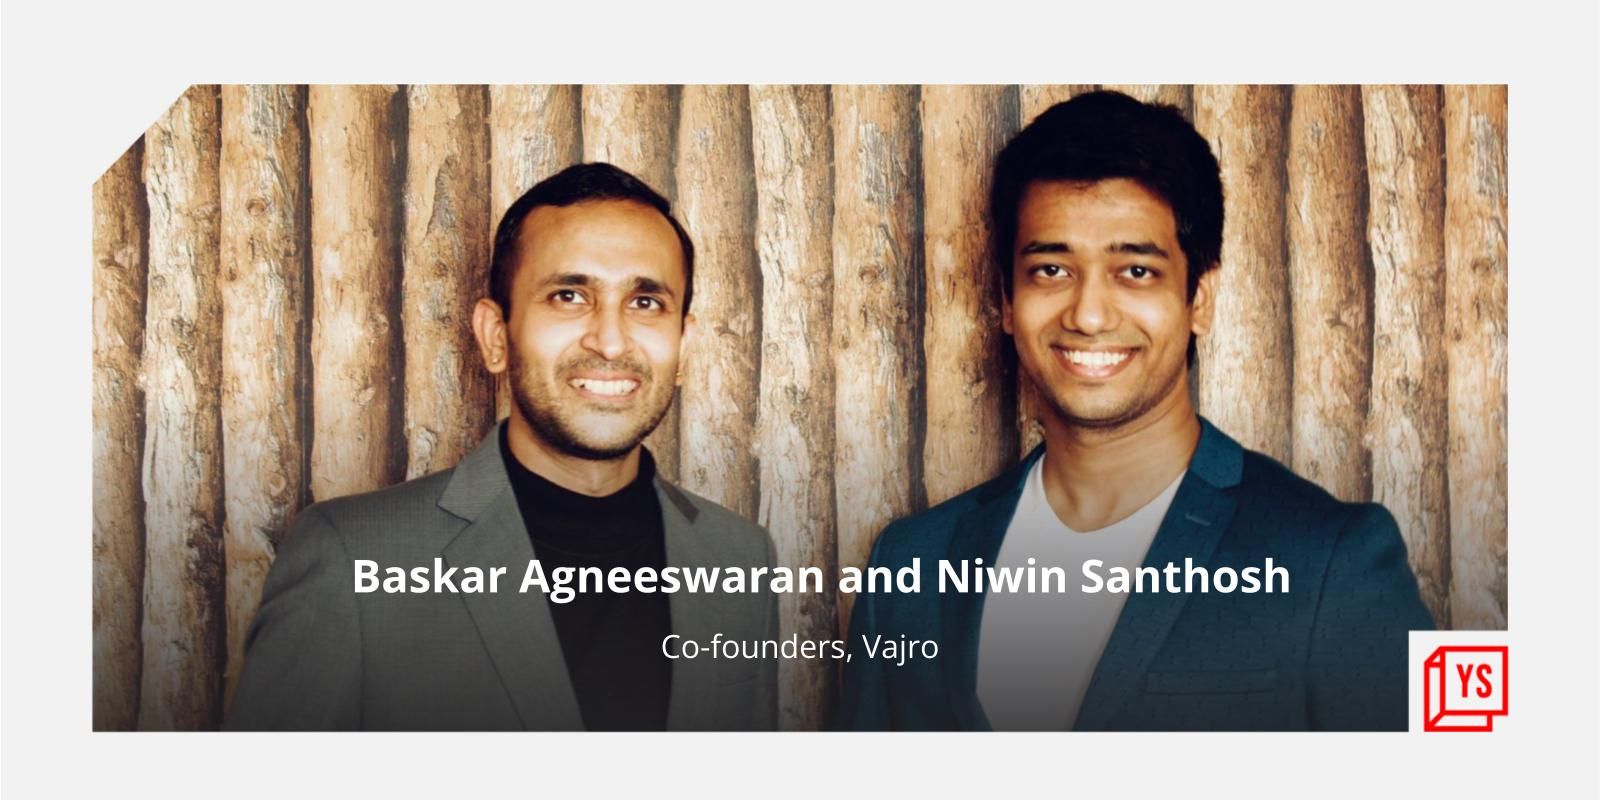 This Chennai-based startup helps ecommerce SMBs build mobile apps in 60 minutes